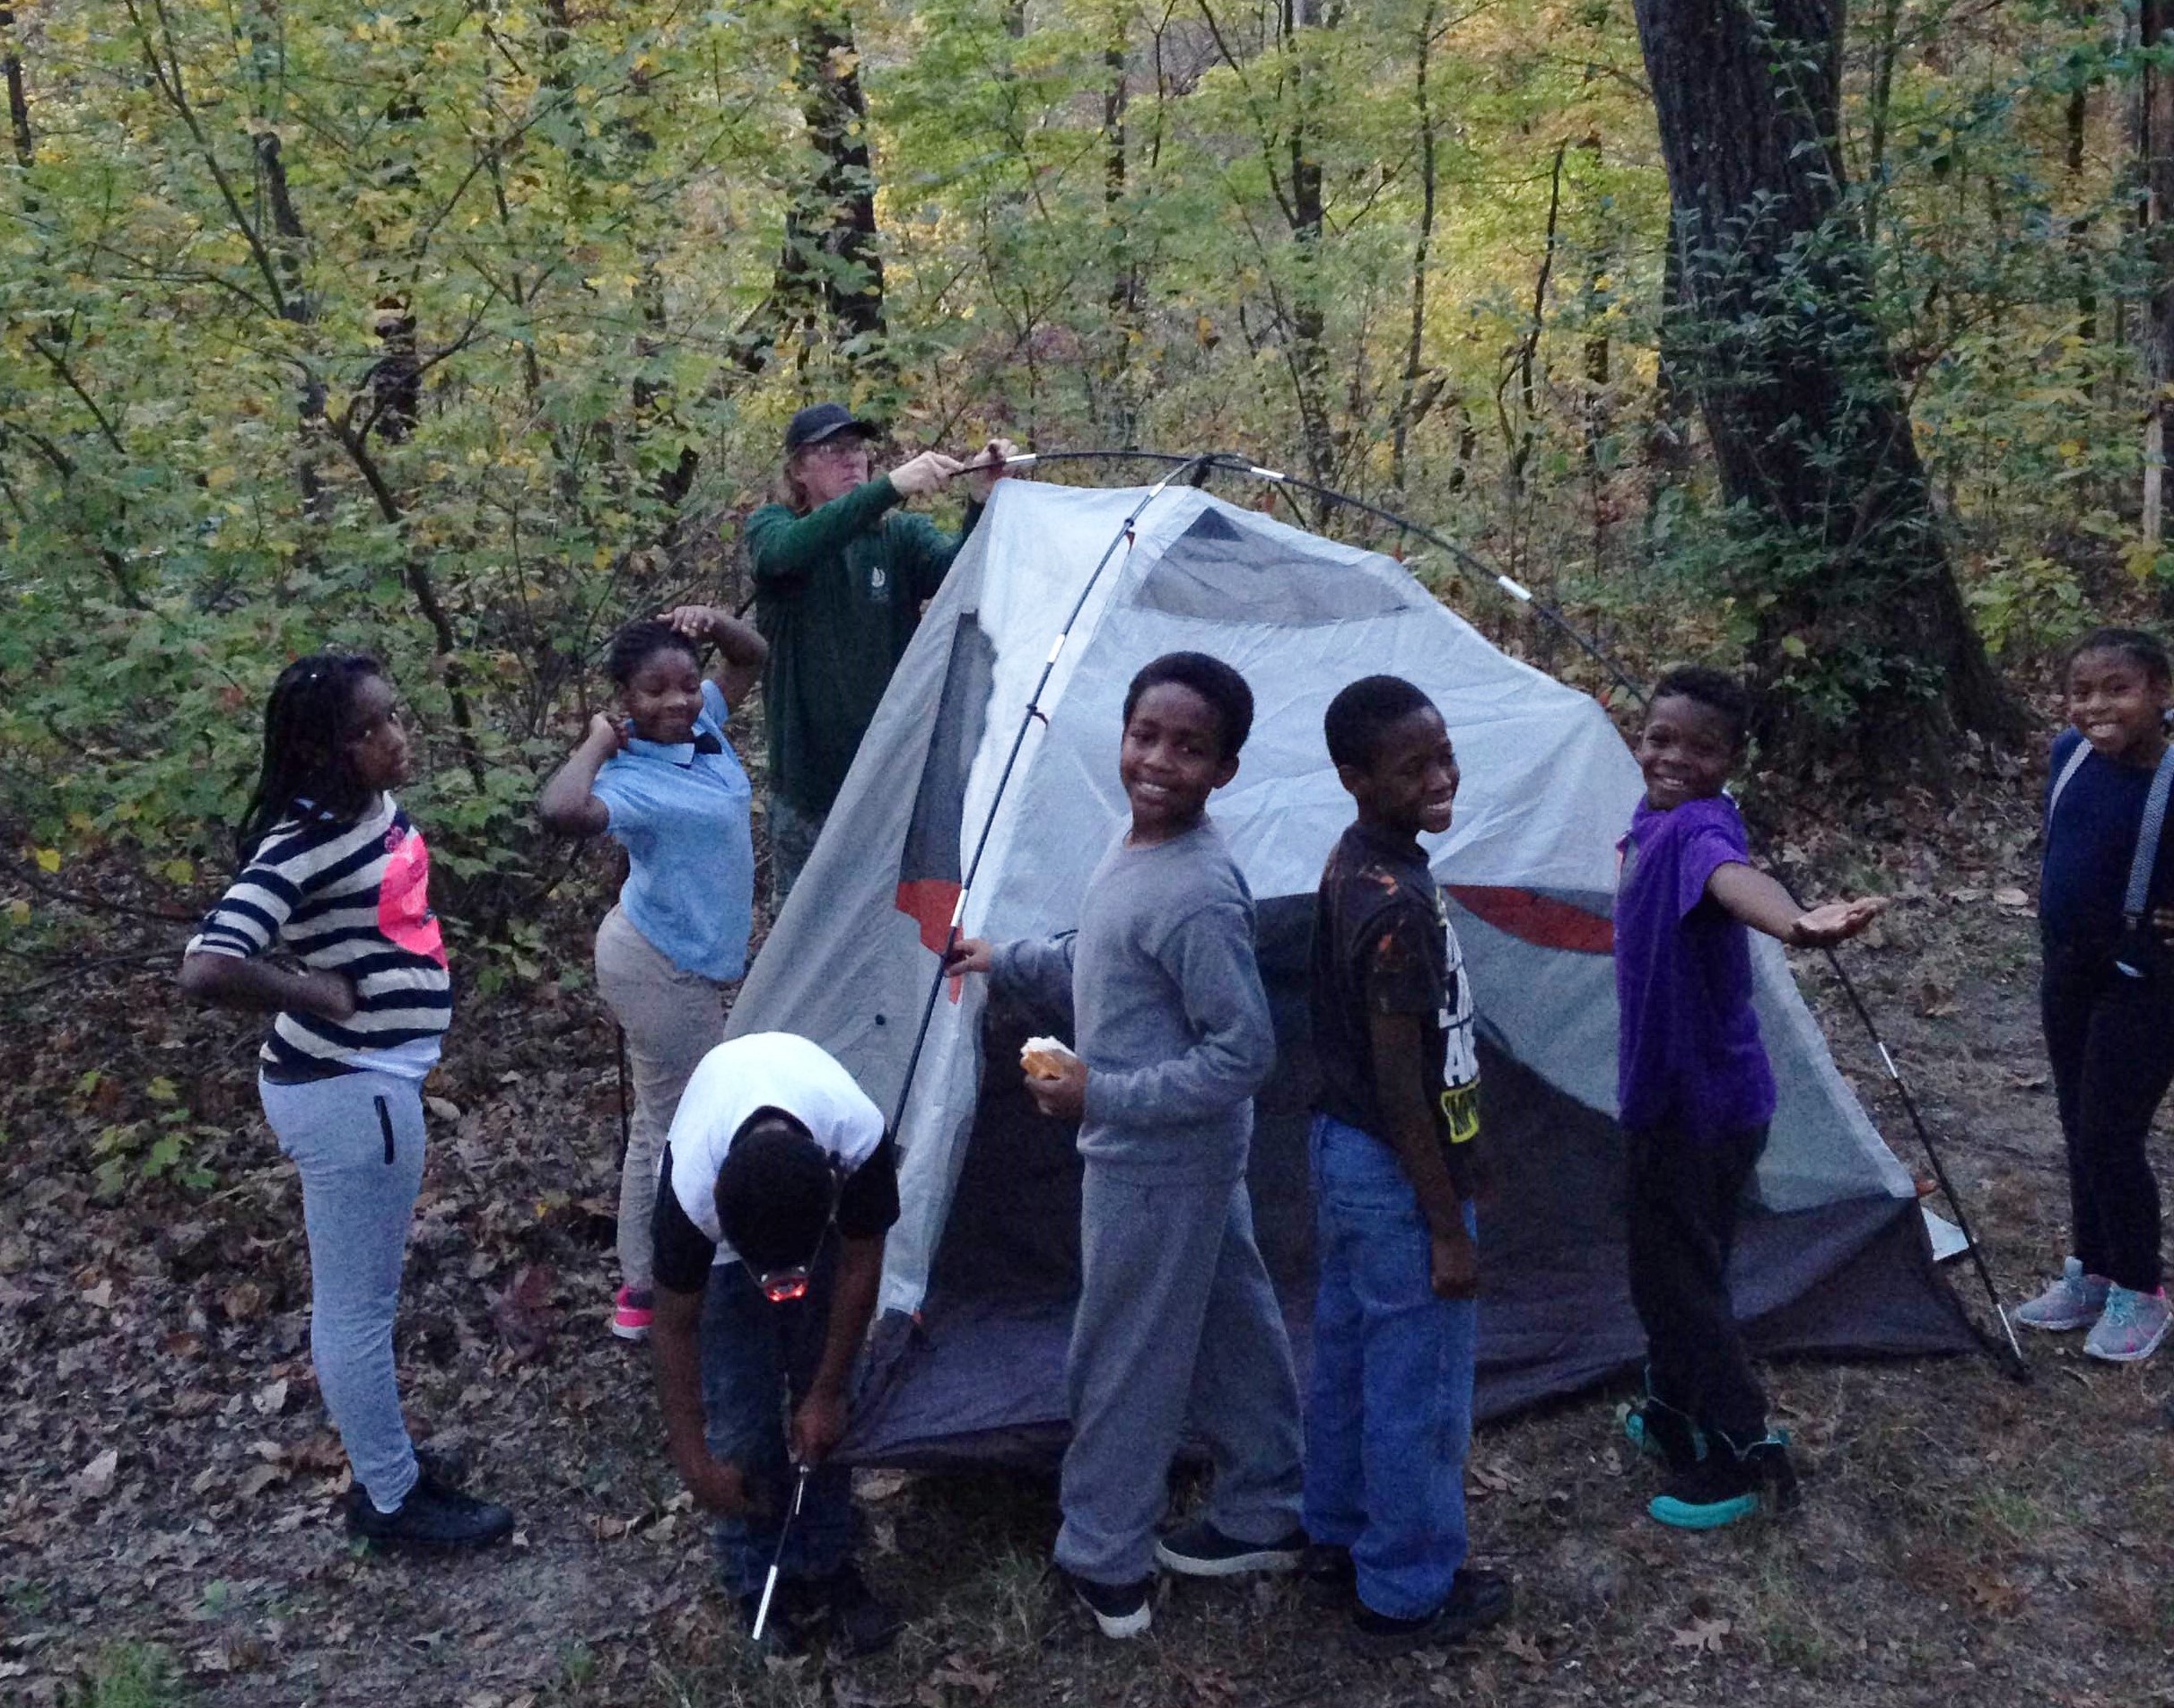 Young St. Louis ICO participants help set up a tent at their campsite.